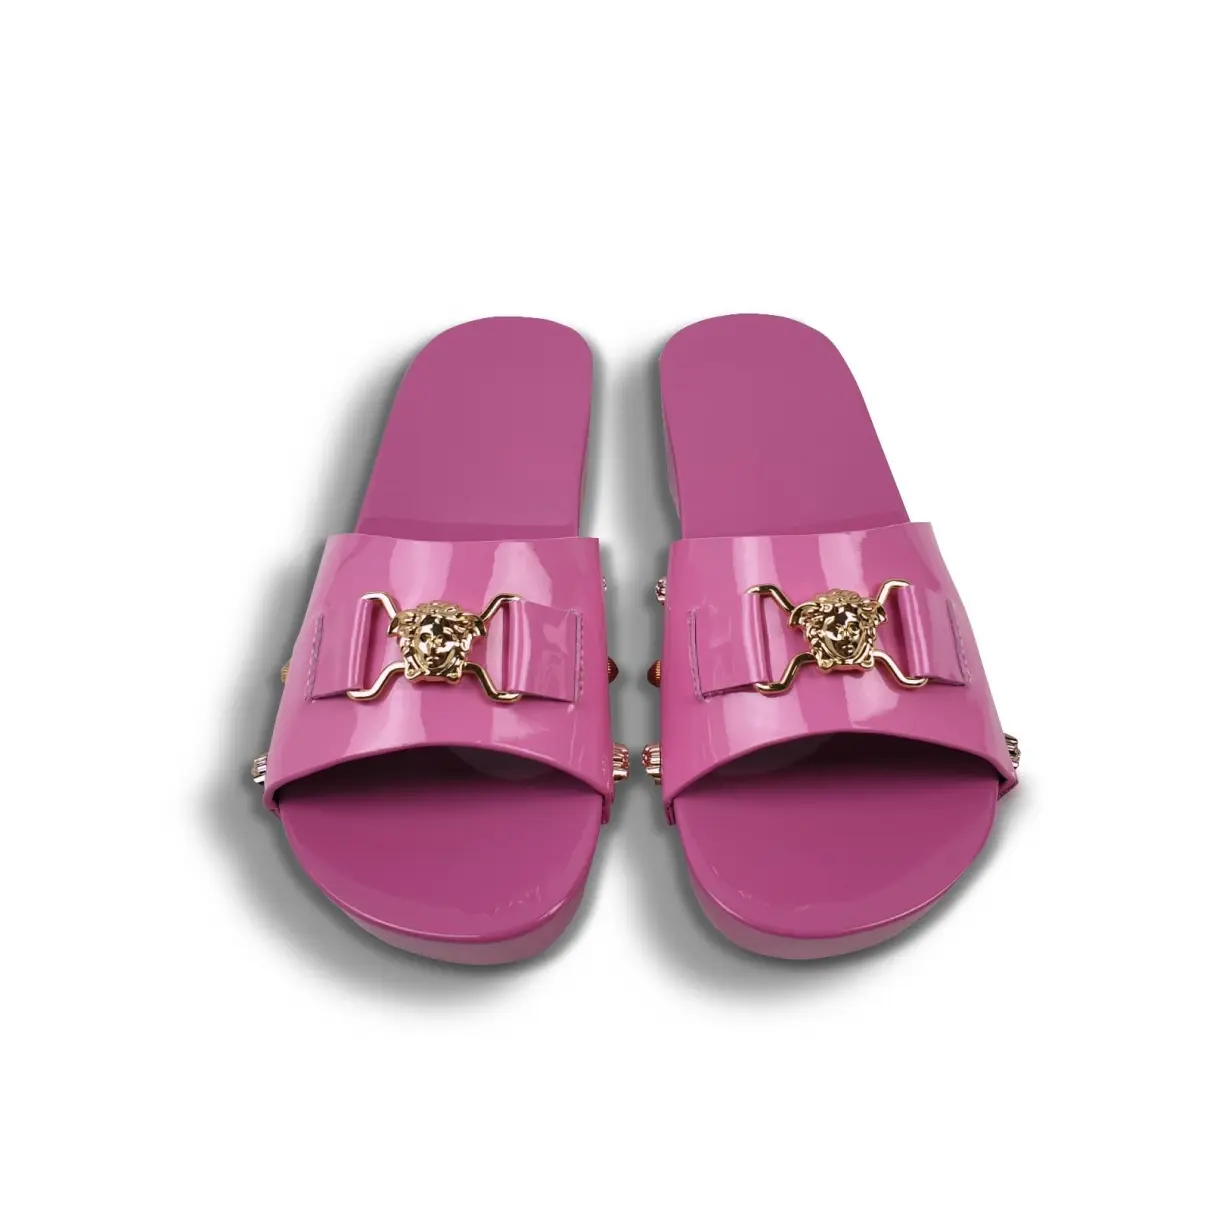 Buy Versace Patent leather sandals online